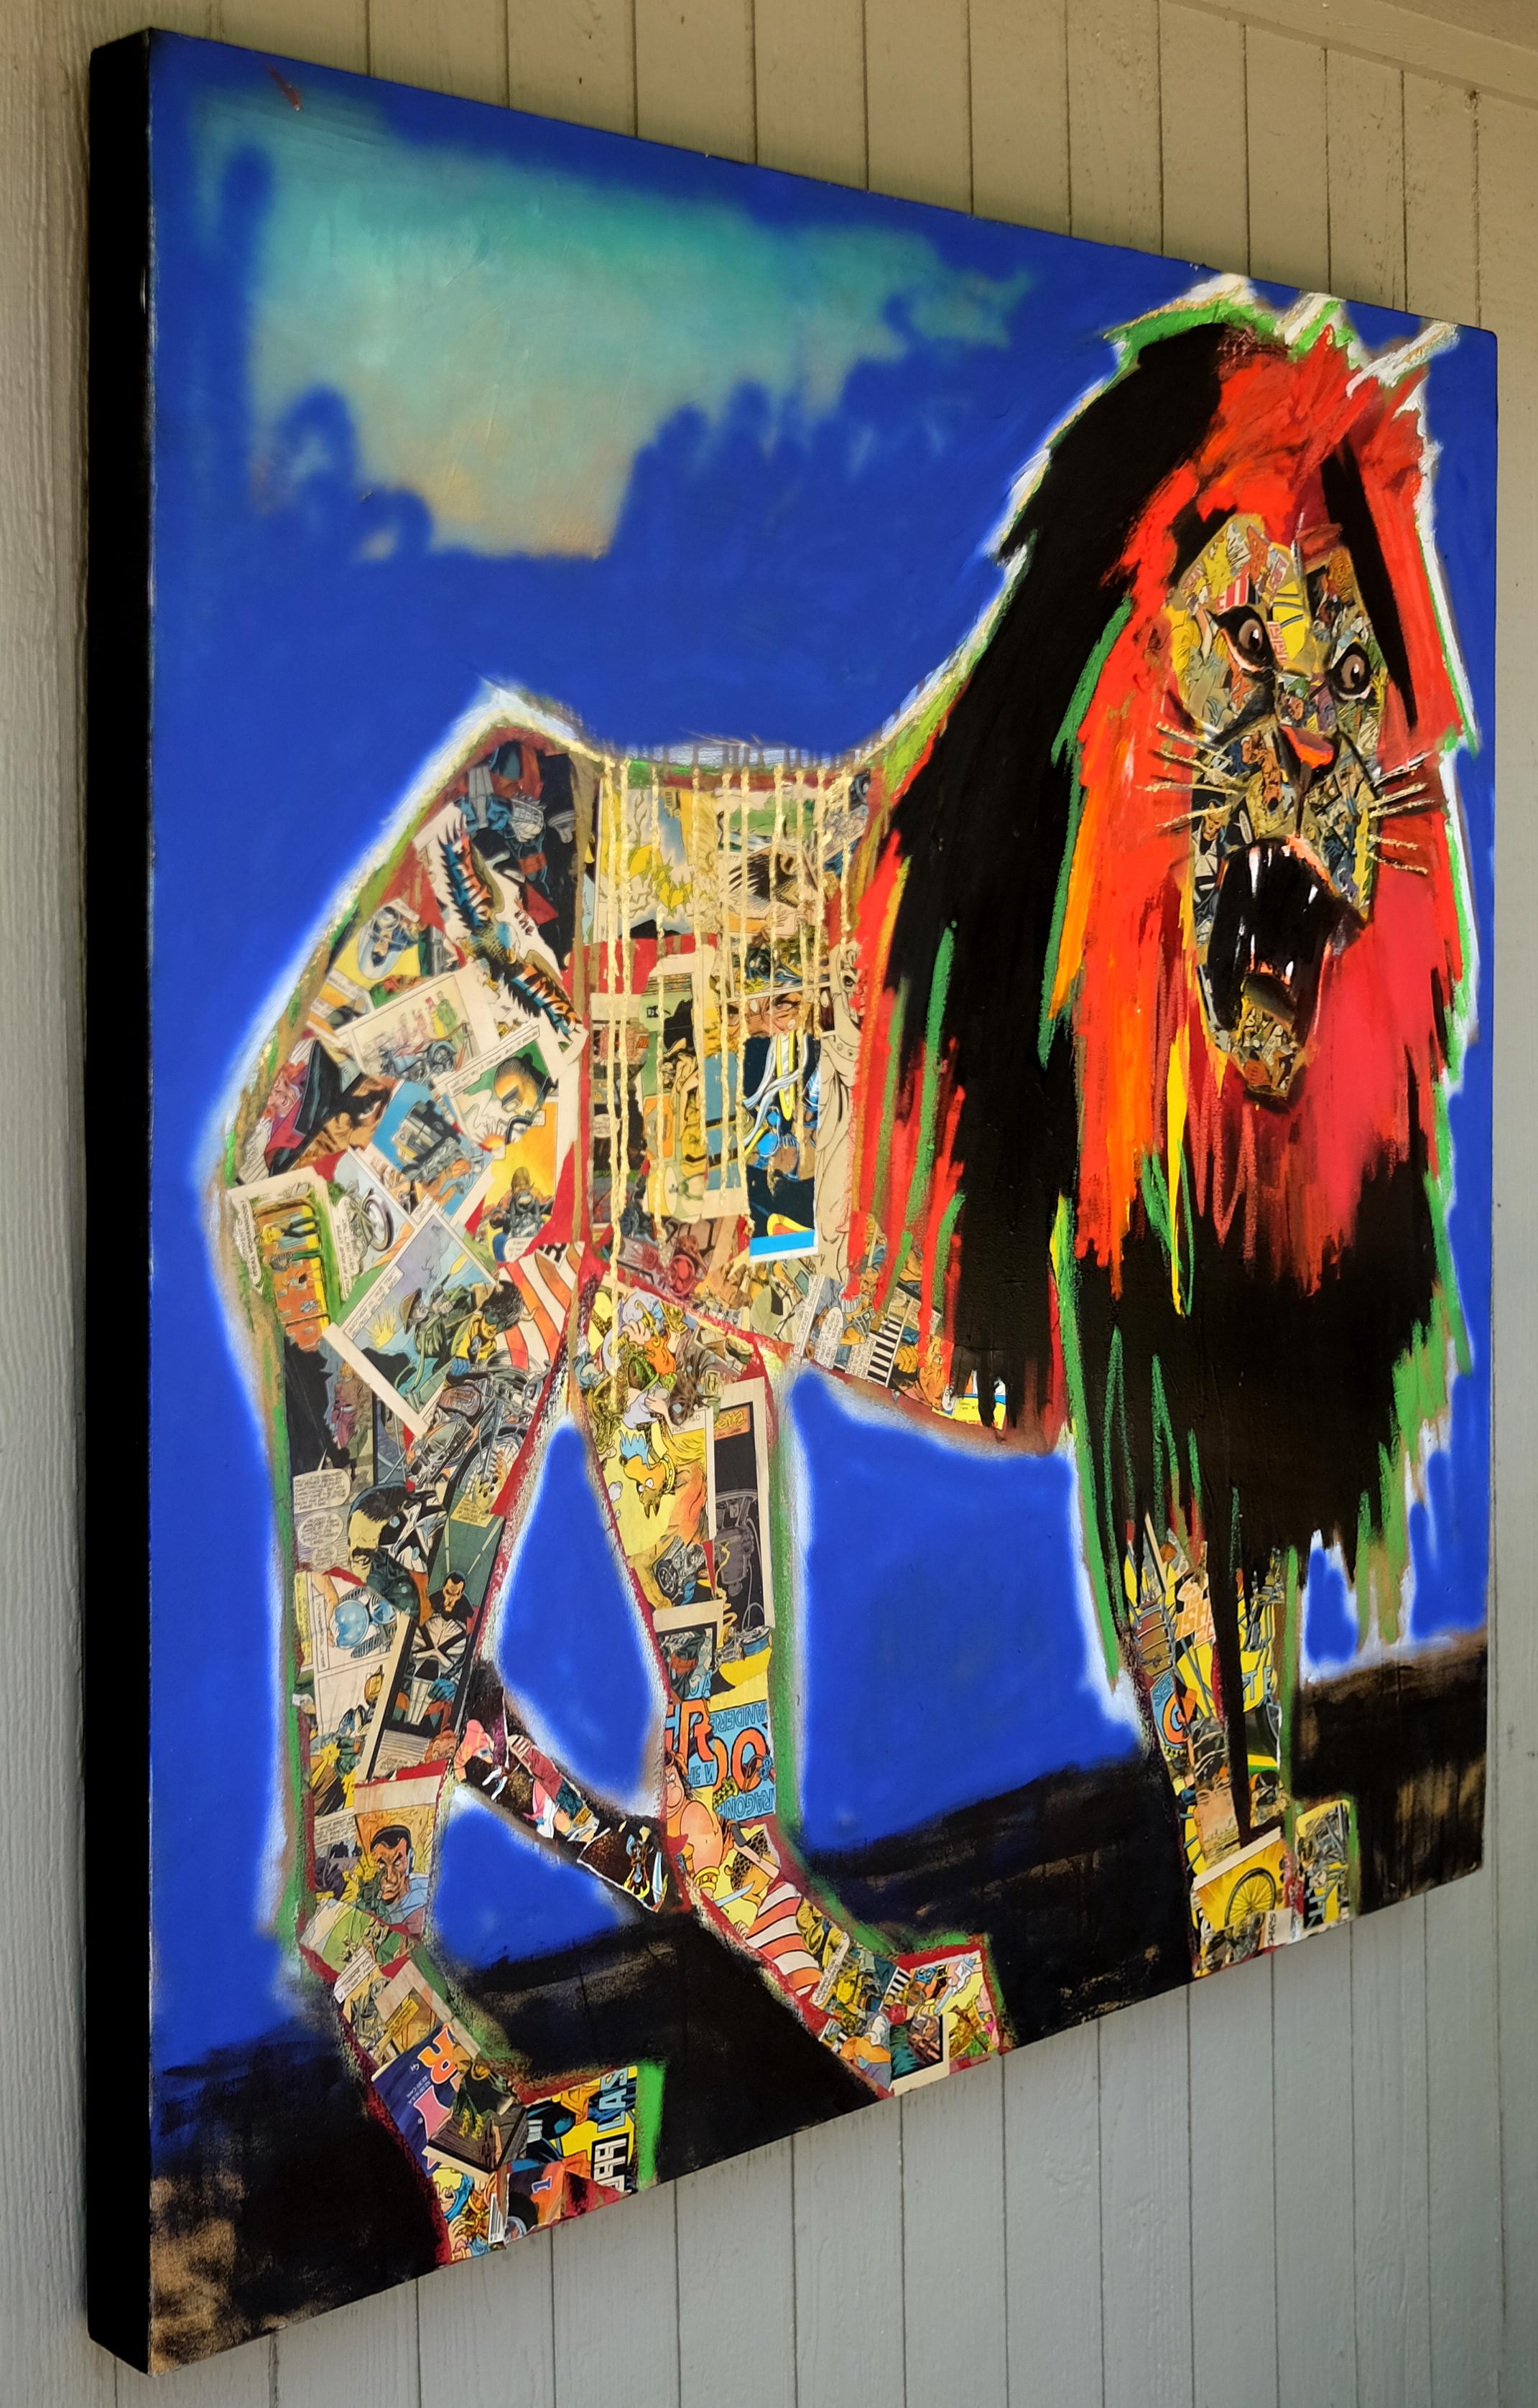 <p>Artist Comments<br>Artist Scott Dykema demonstrates a roaring lion with a fierce look in its eyes. One of the biggest pieces in his series of collaged mixed media portraits and animals. Scott displays his edgy street art style with spray-painted